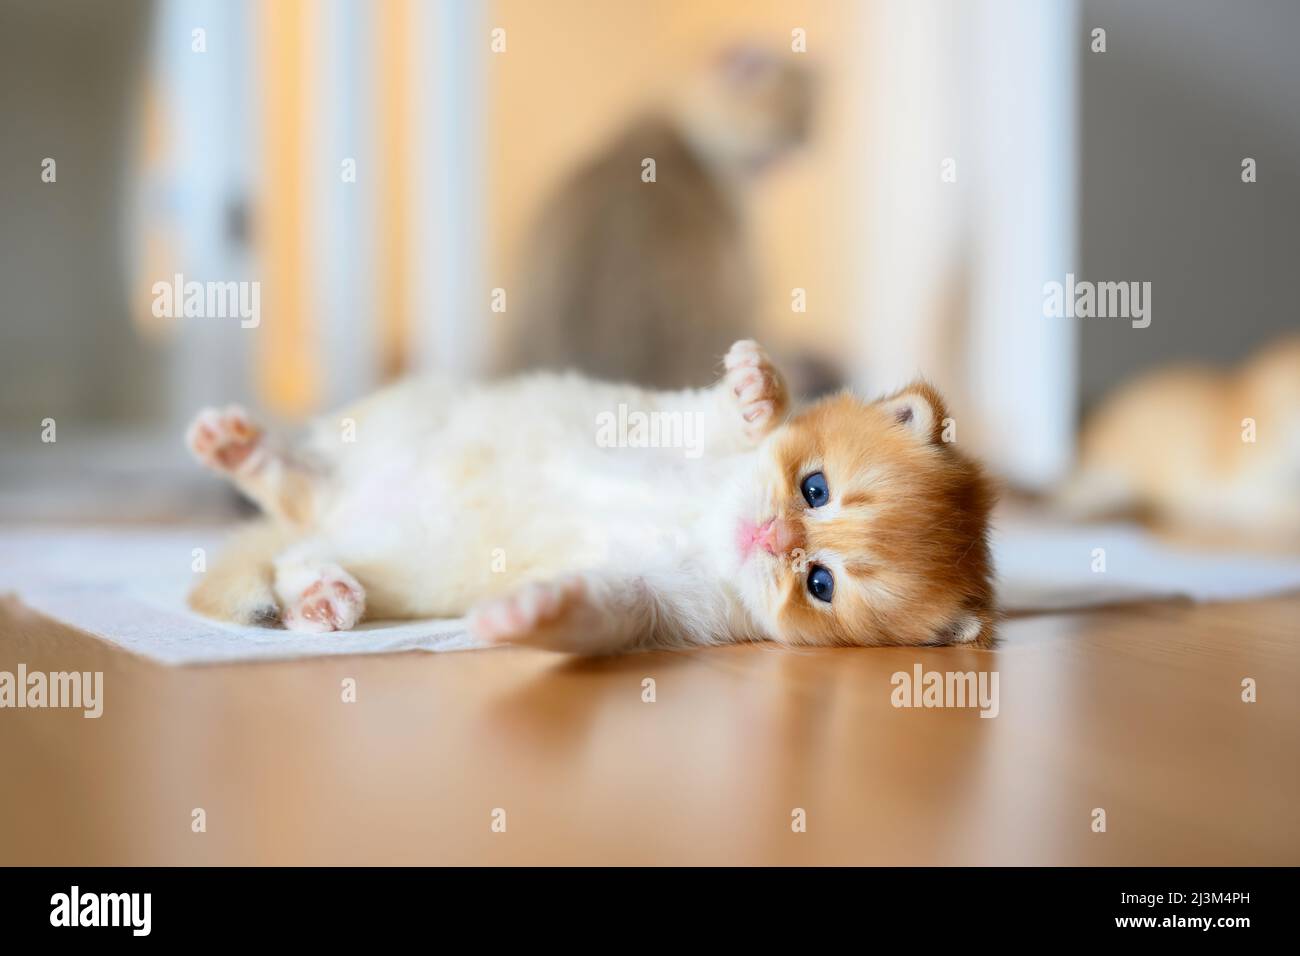 British Shorthair Golden kitten sitting on white cloth on wooden floor in room, baby kitten learning to walk and play naughty. Lovely posture, pure an Stock Photo